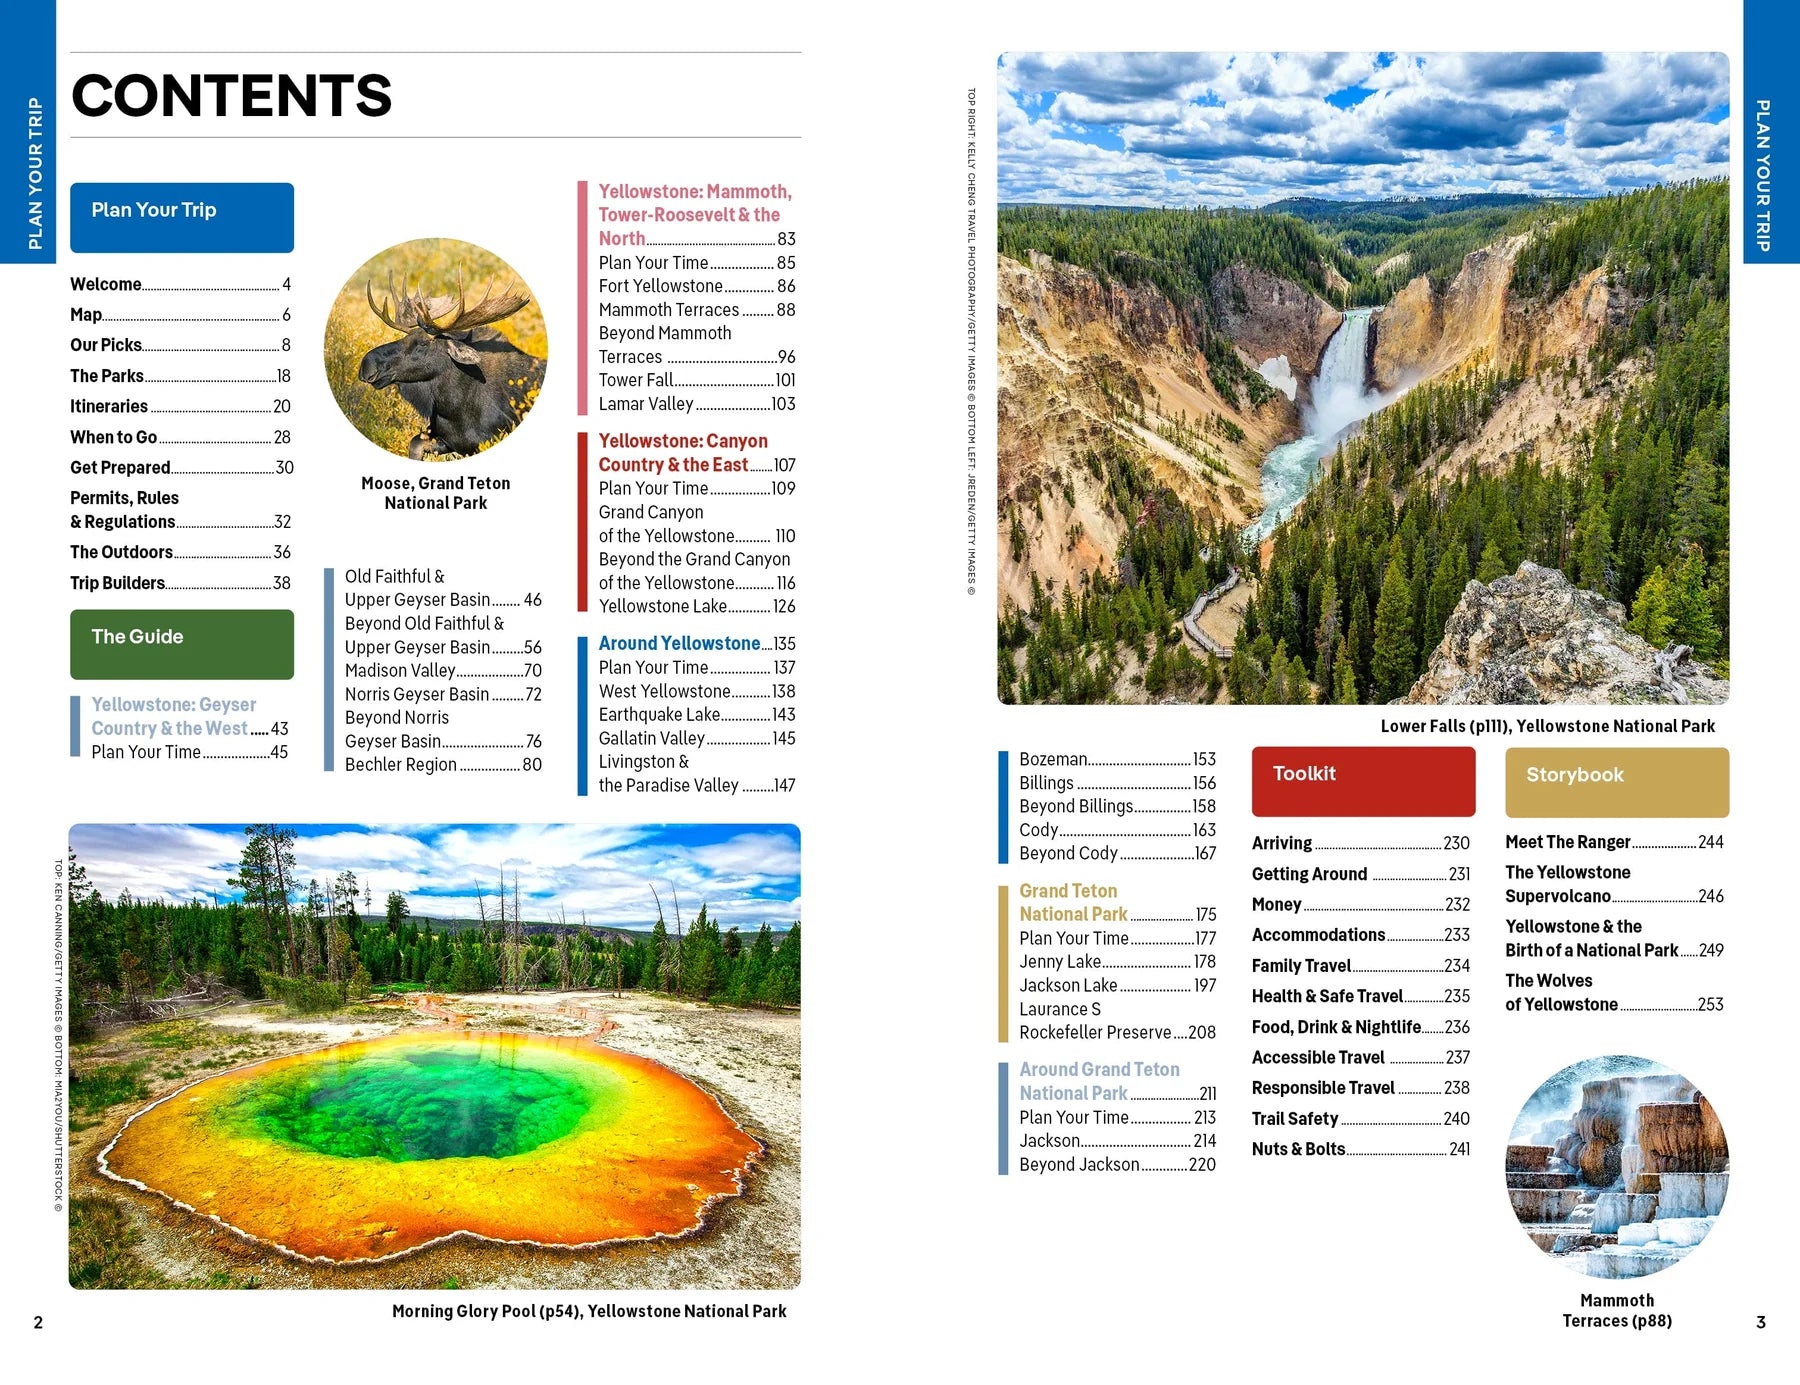 Yellowstone and Grand Teton National Parks - Lonely Planet